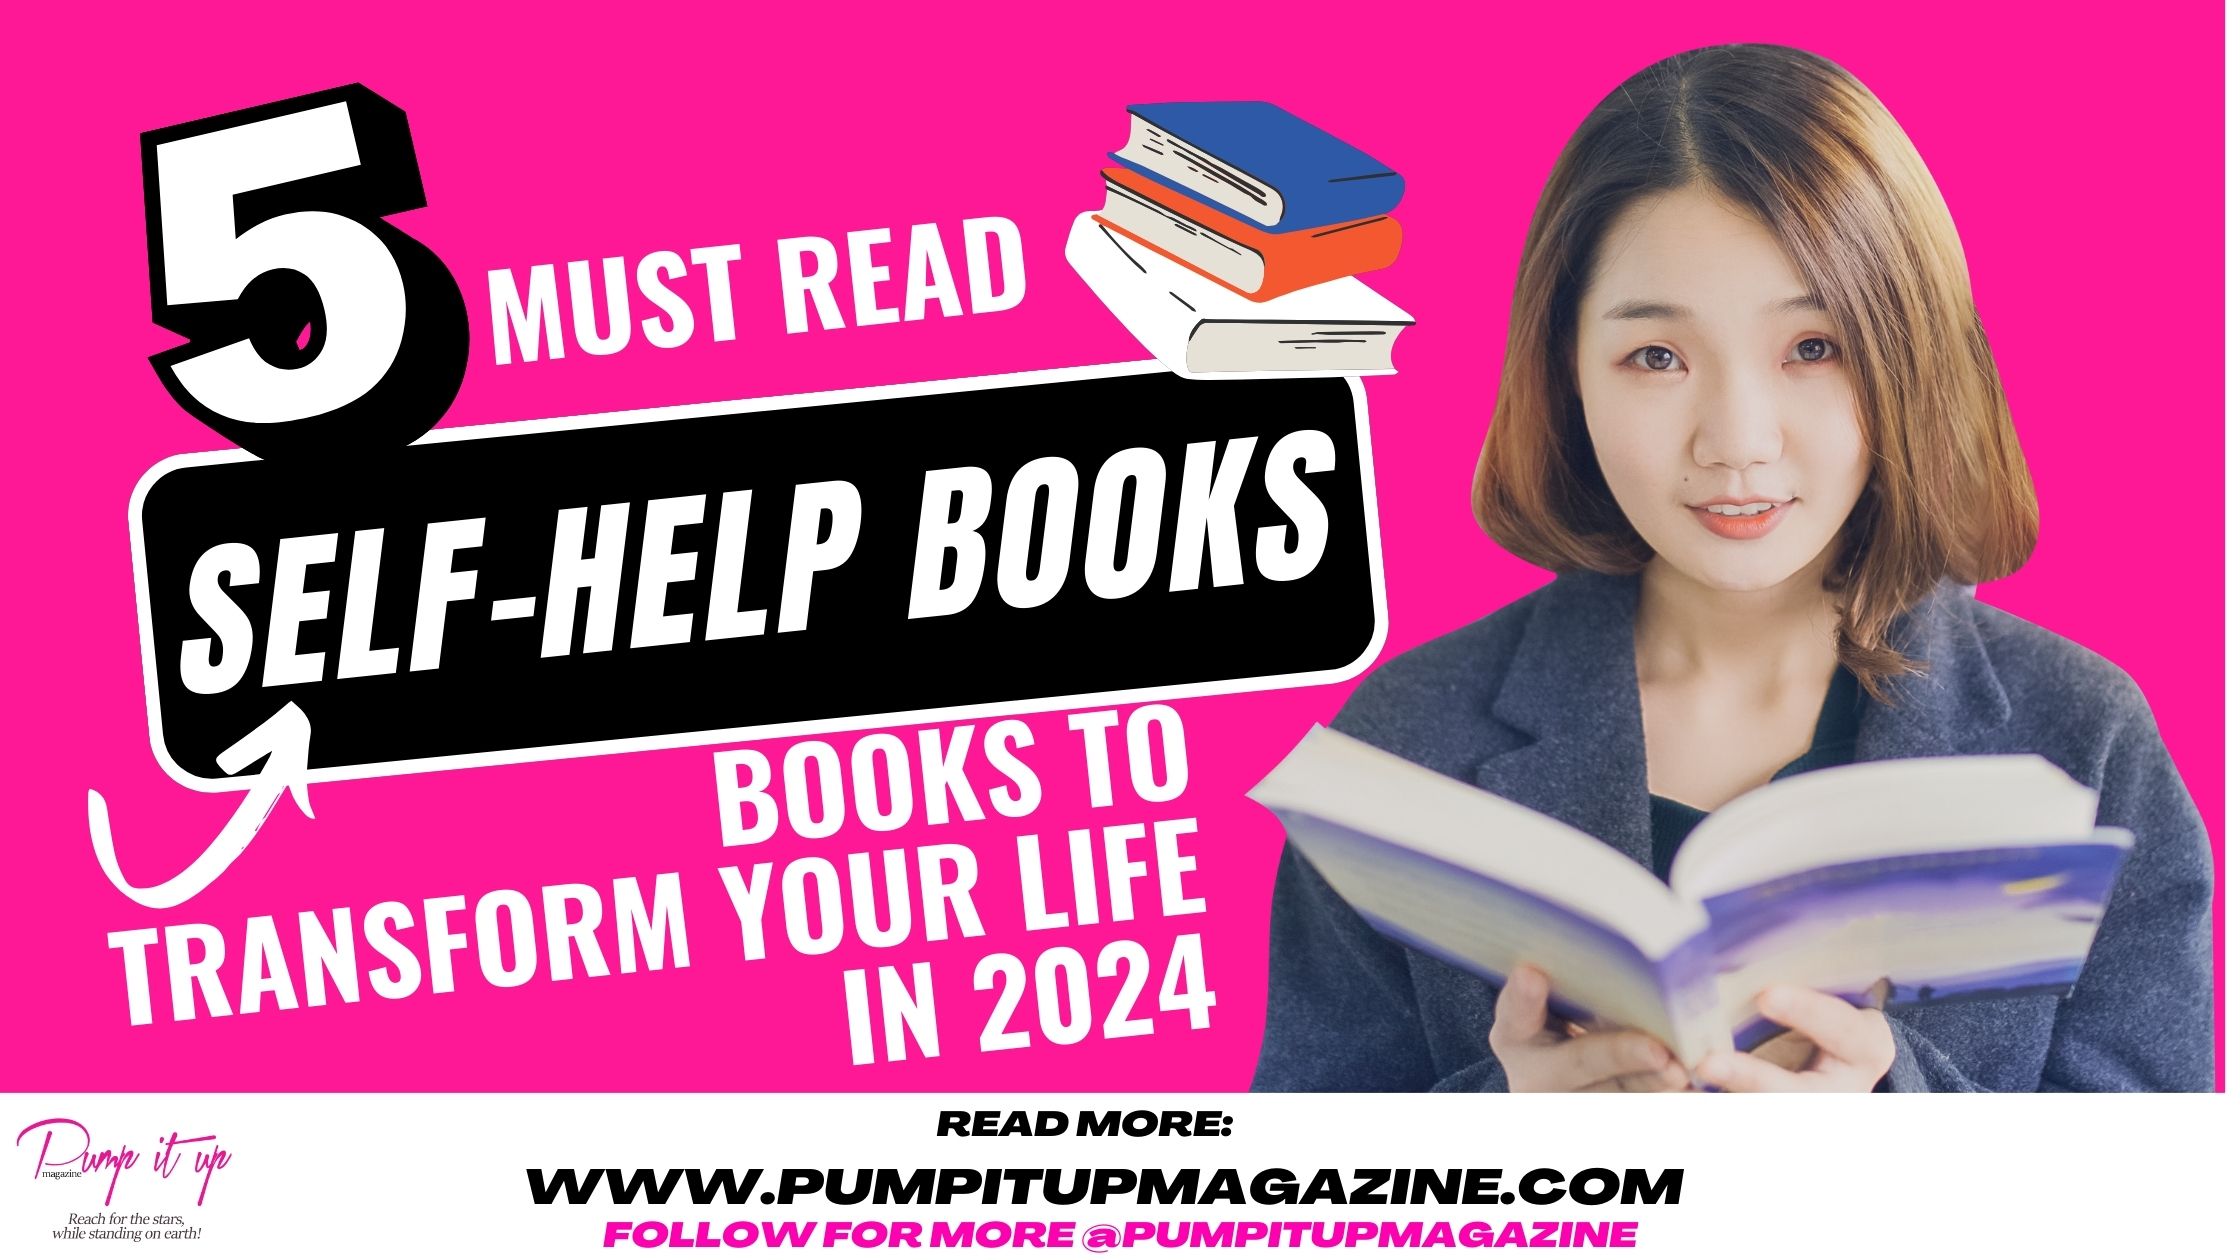 Self-Help books Books to Transform Your Life in 2024 must read www.pumpitupmagazine.com read more follow for more @pumpitupmagazine (1)